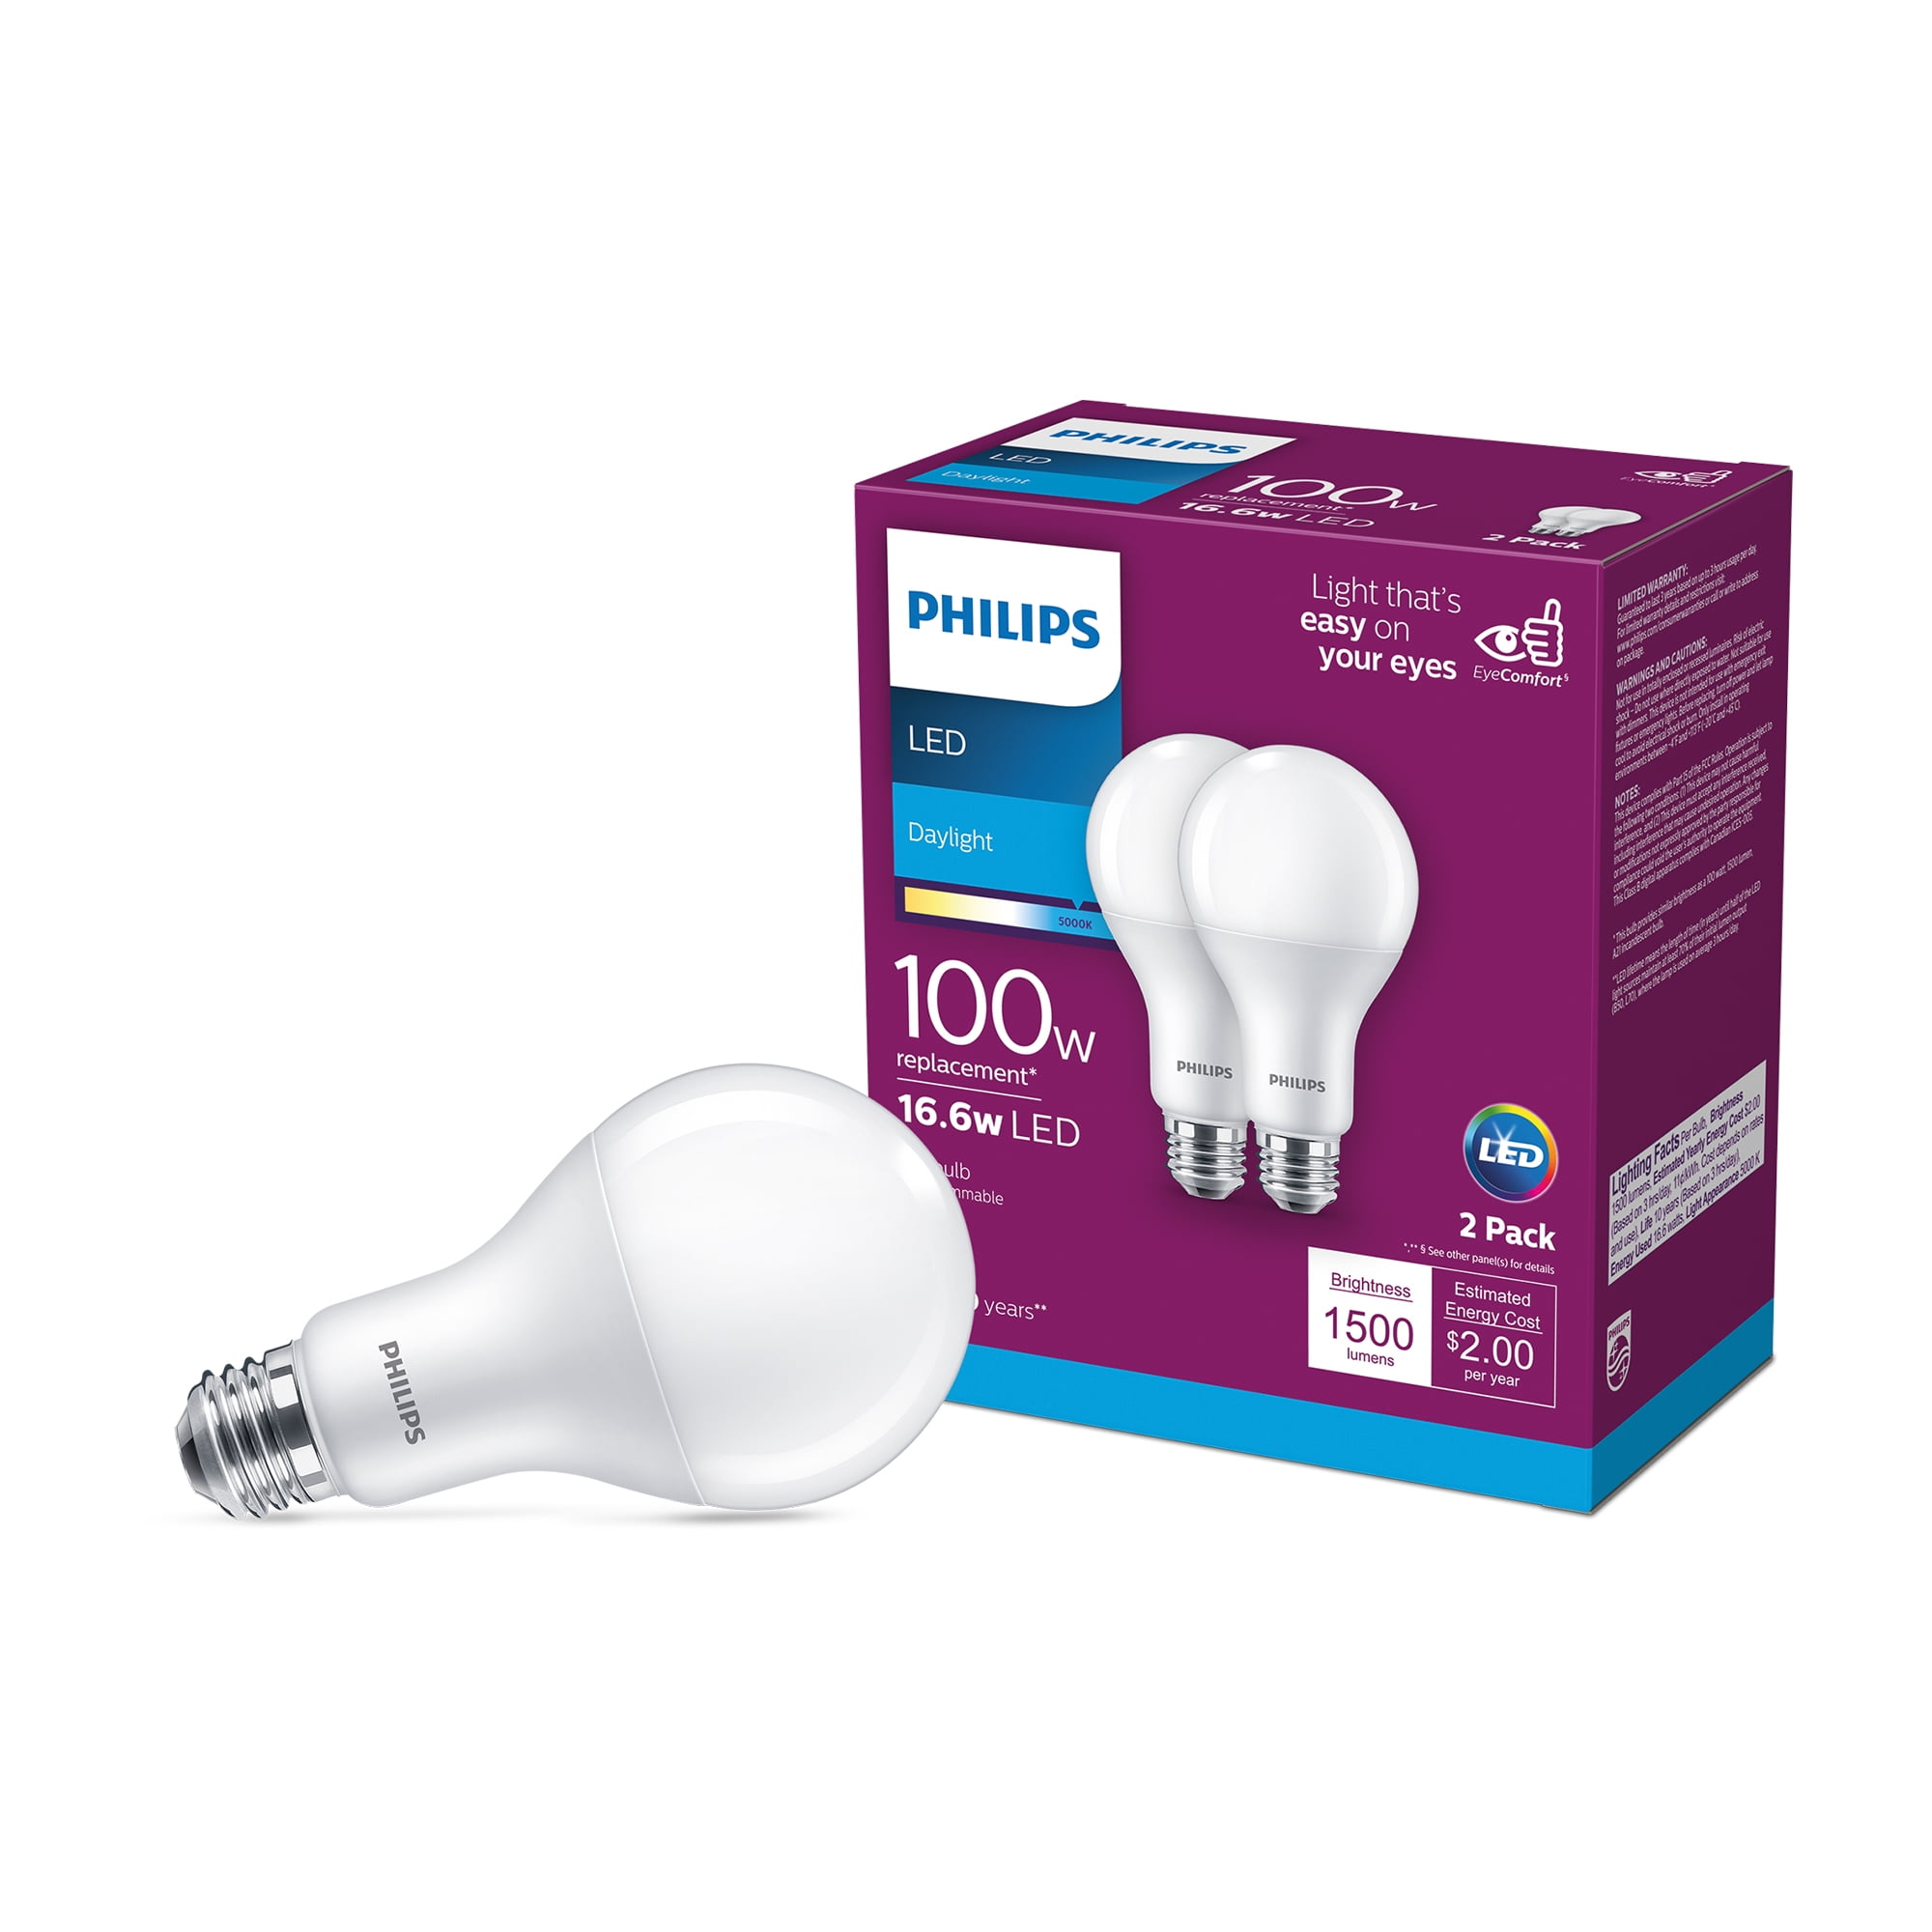 Lelie beddengoed Medaille Philips LED 100-Watt A21 General Purpose Light Bulb, Frosted Daylight,  Non-Dimmable, E26 Medium Base (2-Pack) - Walmart.com